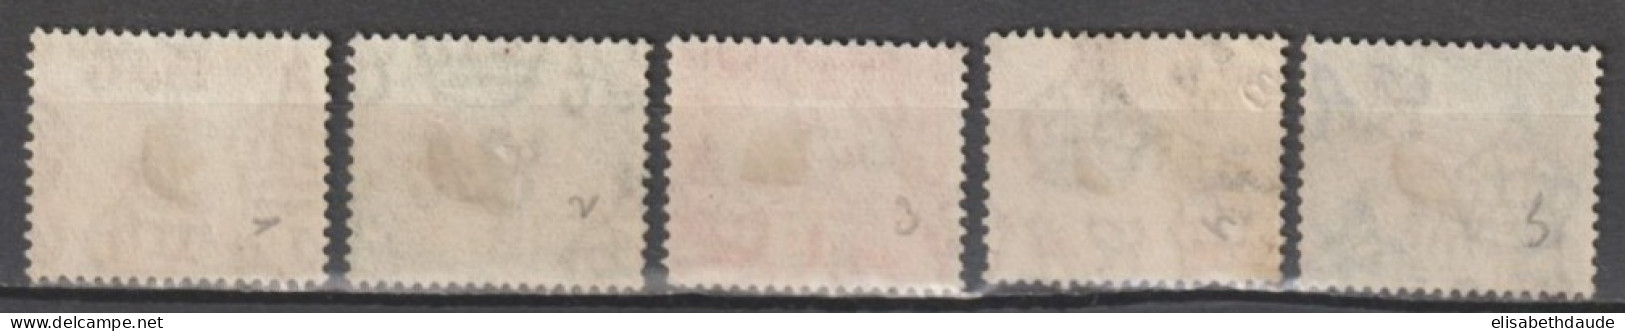 HONG KONG (CHINA) - 1924 - TAXE SERIE COMPLETE YVERT N°1/5 OBLITERES  - COTE = 50 EUR - Timbres-taxe